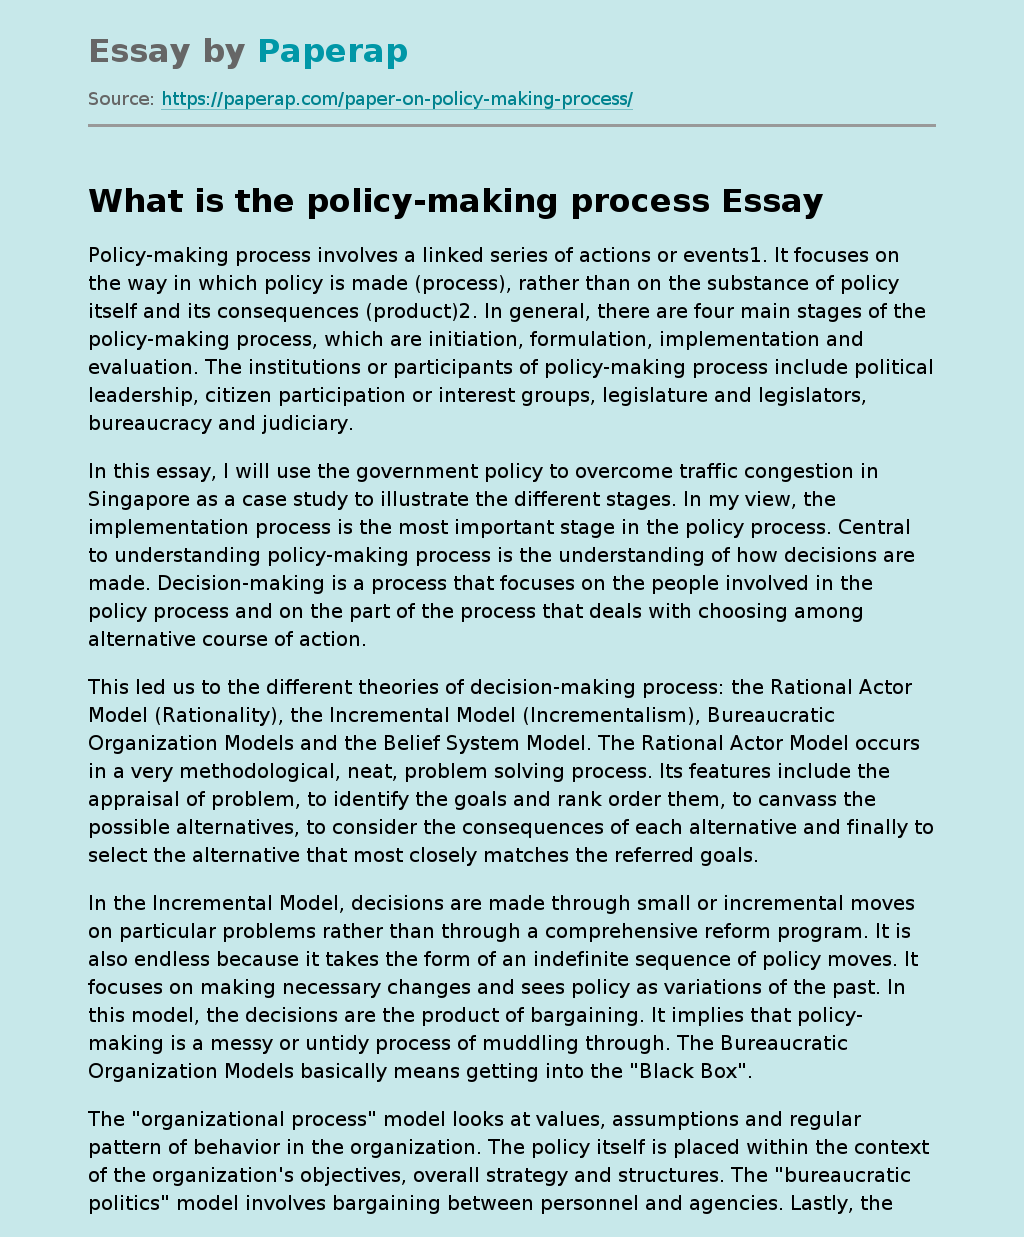 What is the policy-making process